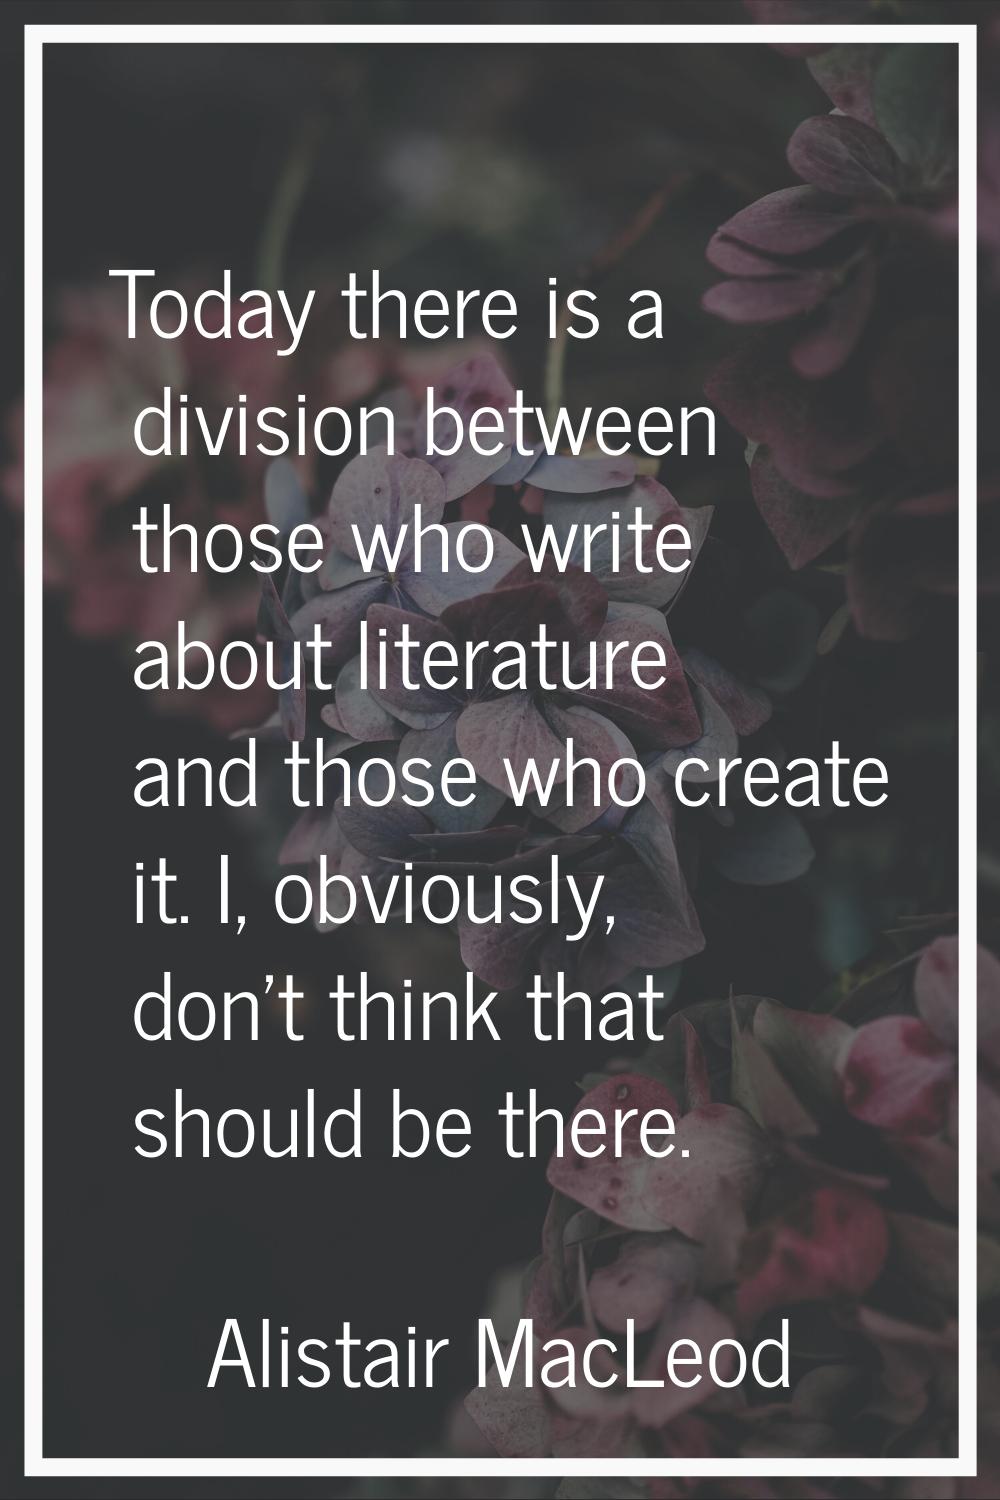 Today there is a division between those who write about literature and those who create it. I, obvi